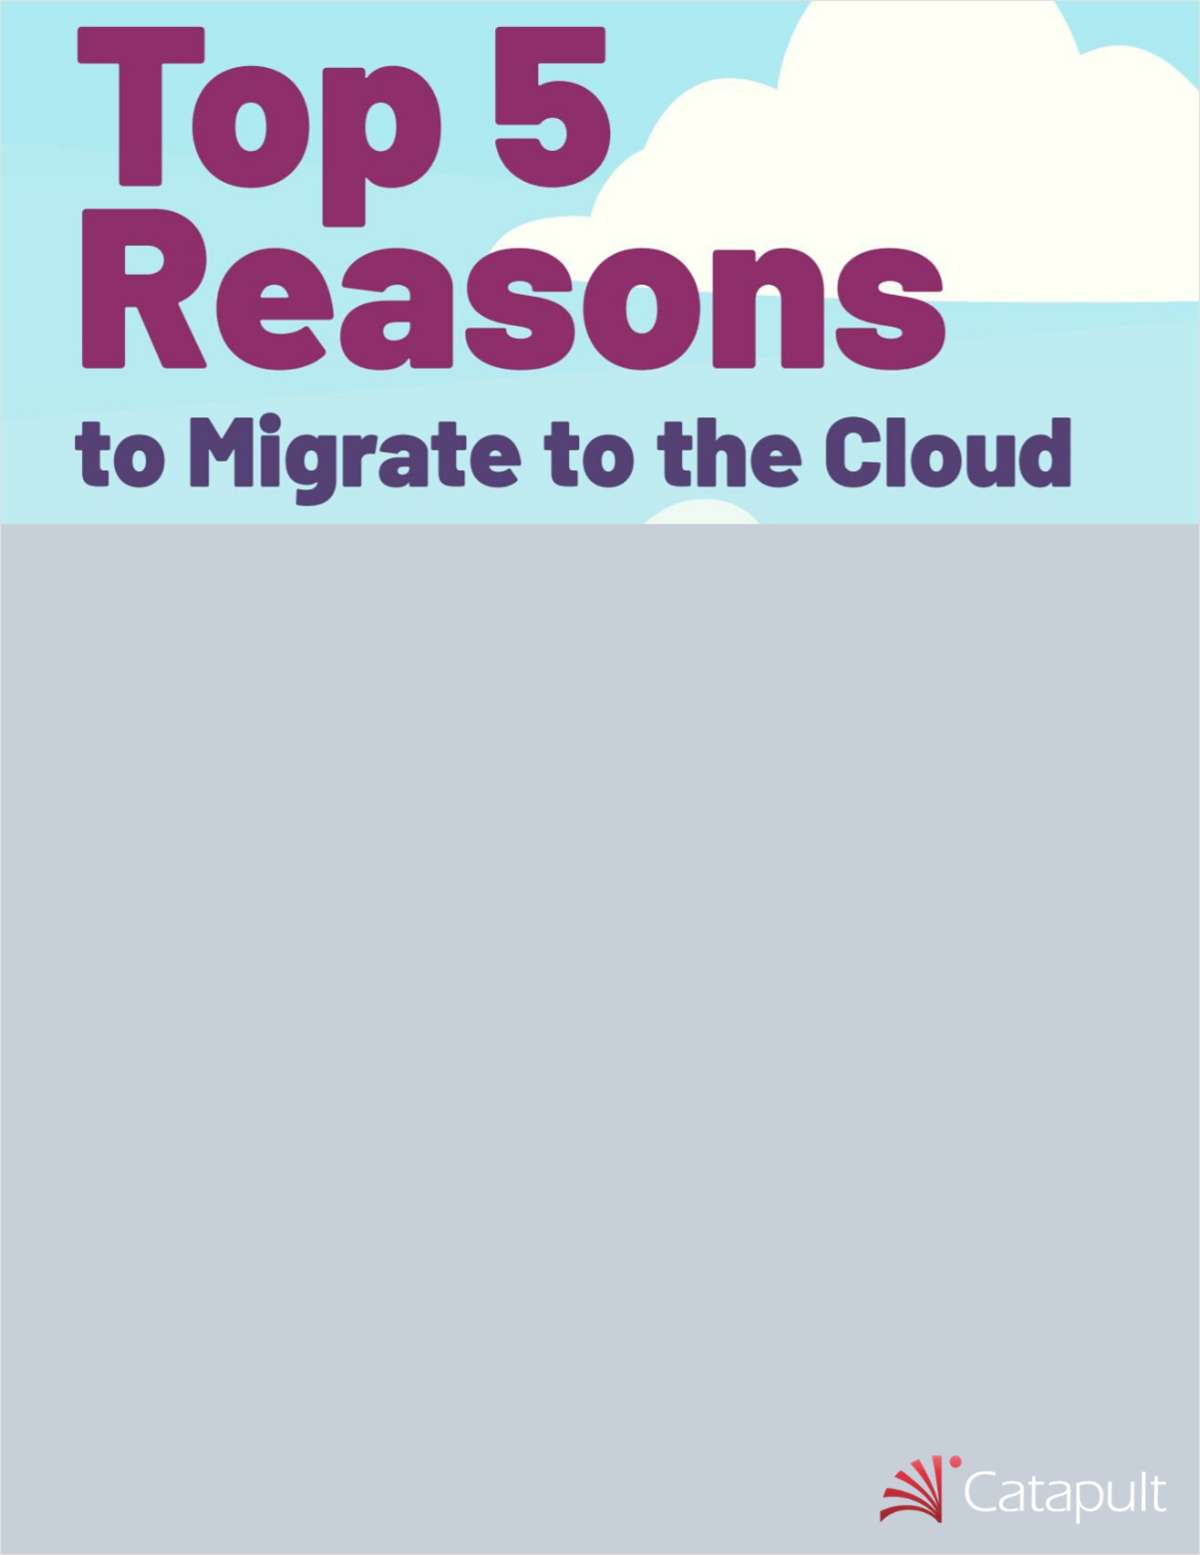 Top 5 Reasons to Migrate to the Cloud